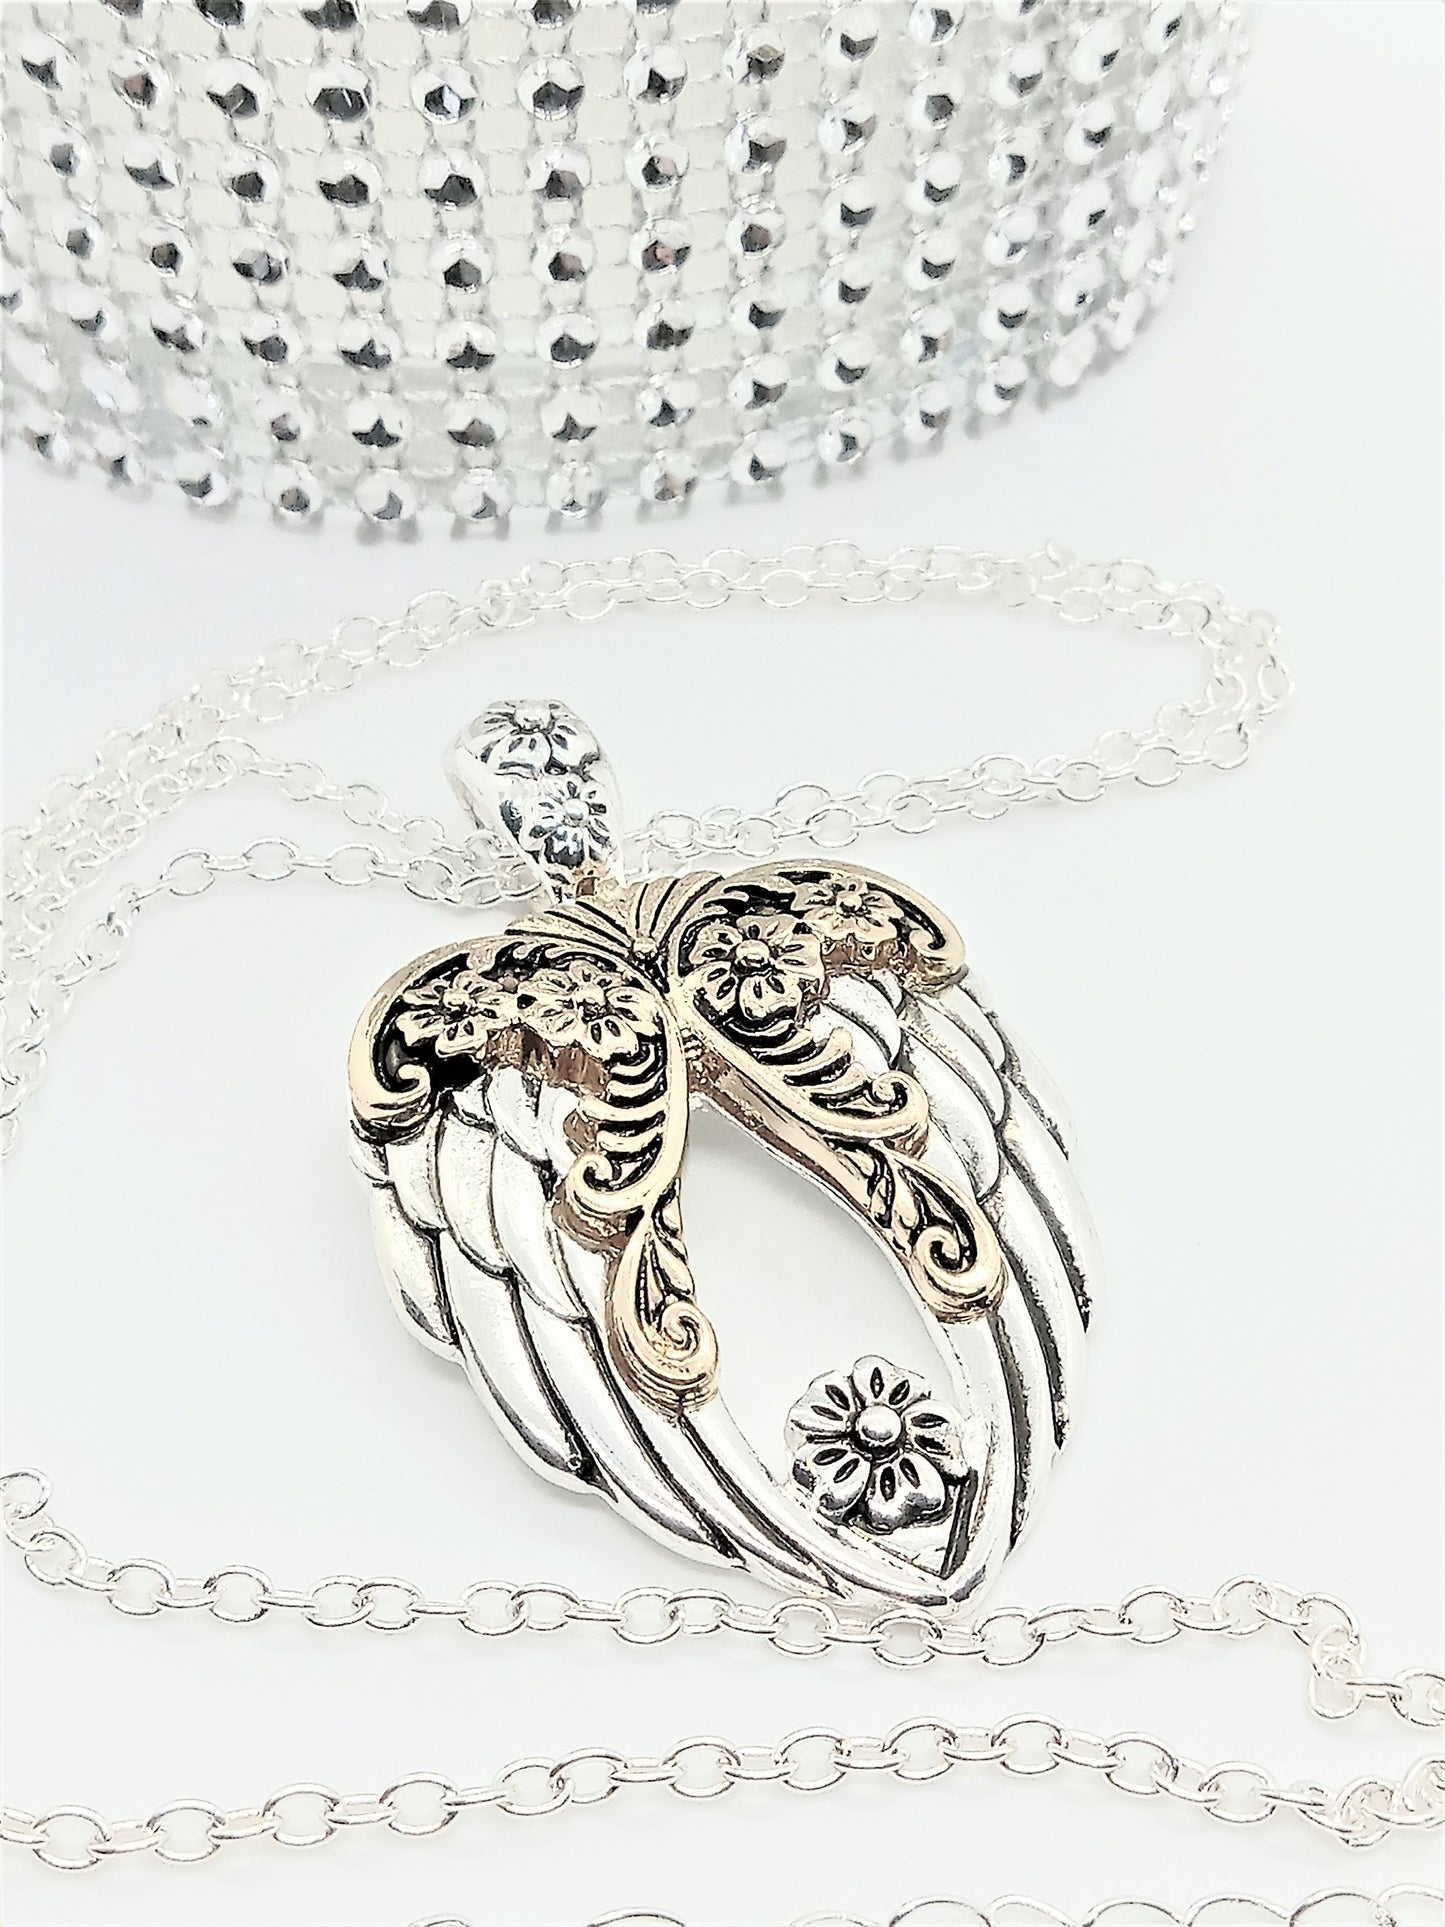 Lovely Religious Inspiration Pendant Necklace